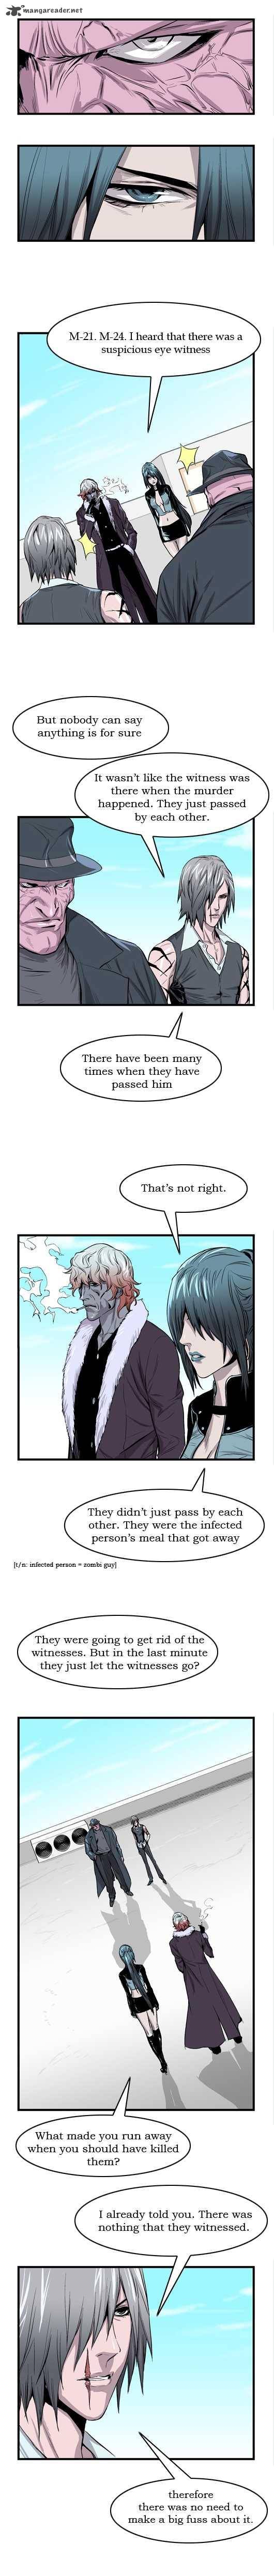 Noblesse 41 3